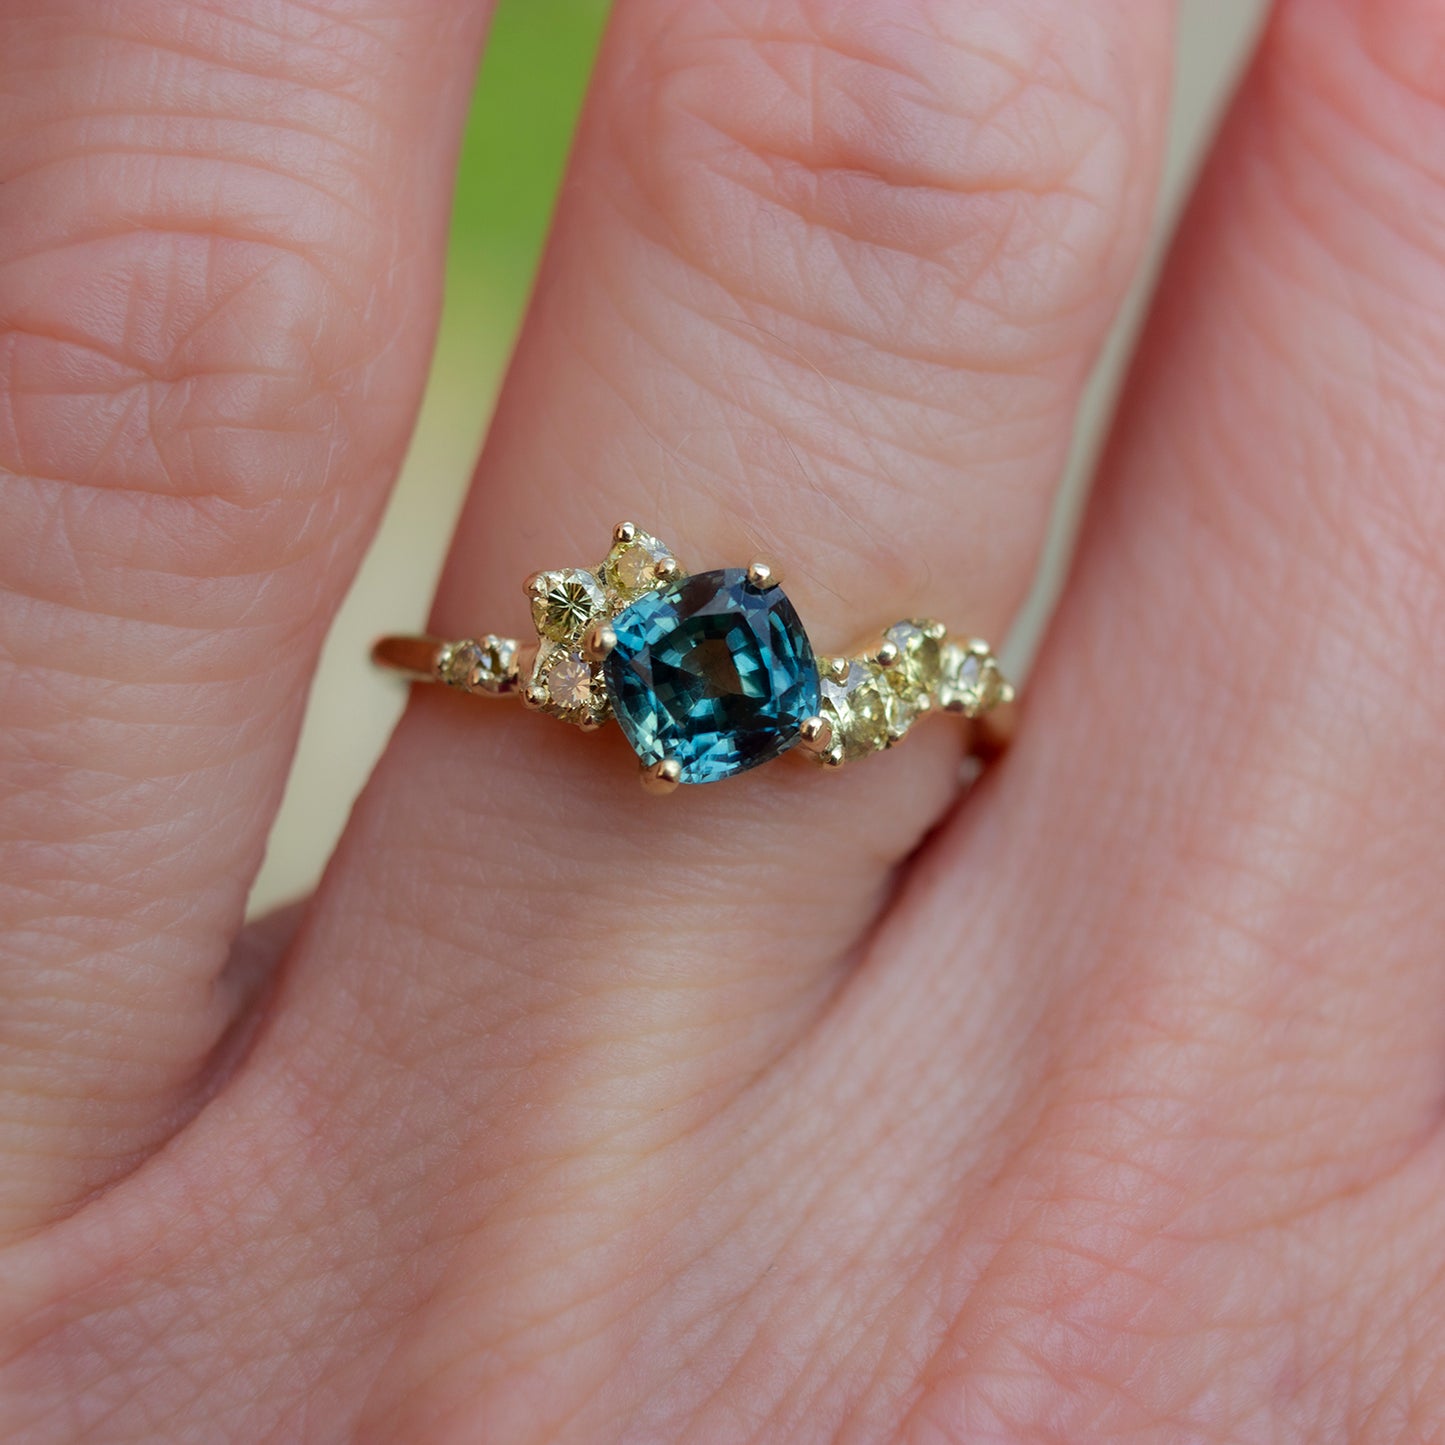 Beautiful, organically shaped ring featuring teal cushion cut sapphire surrounded with asymmetrically scattered yellow diamonds.